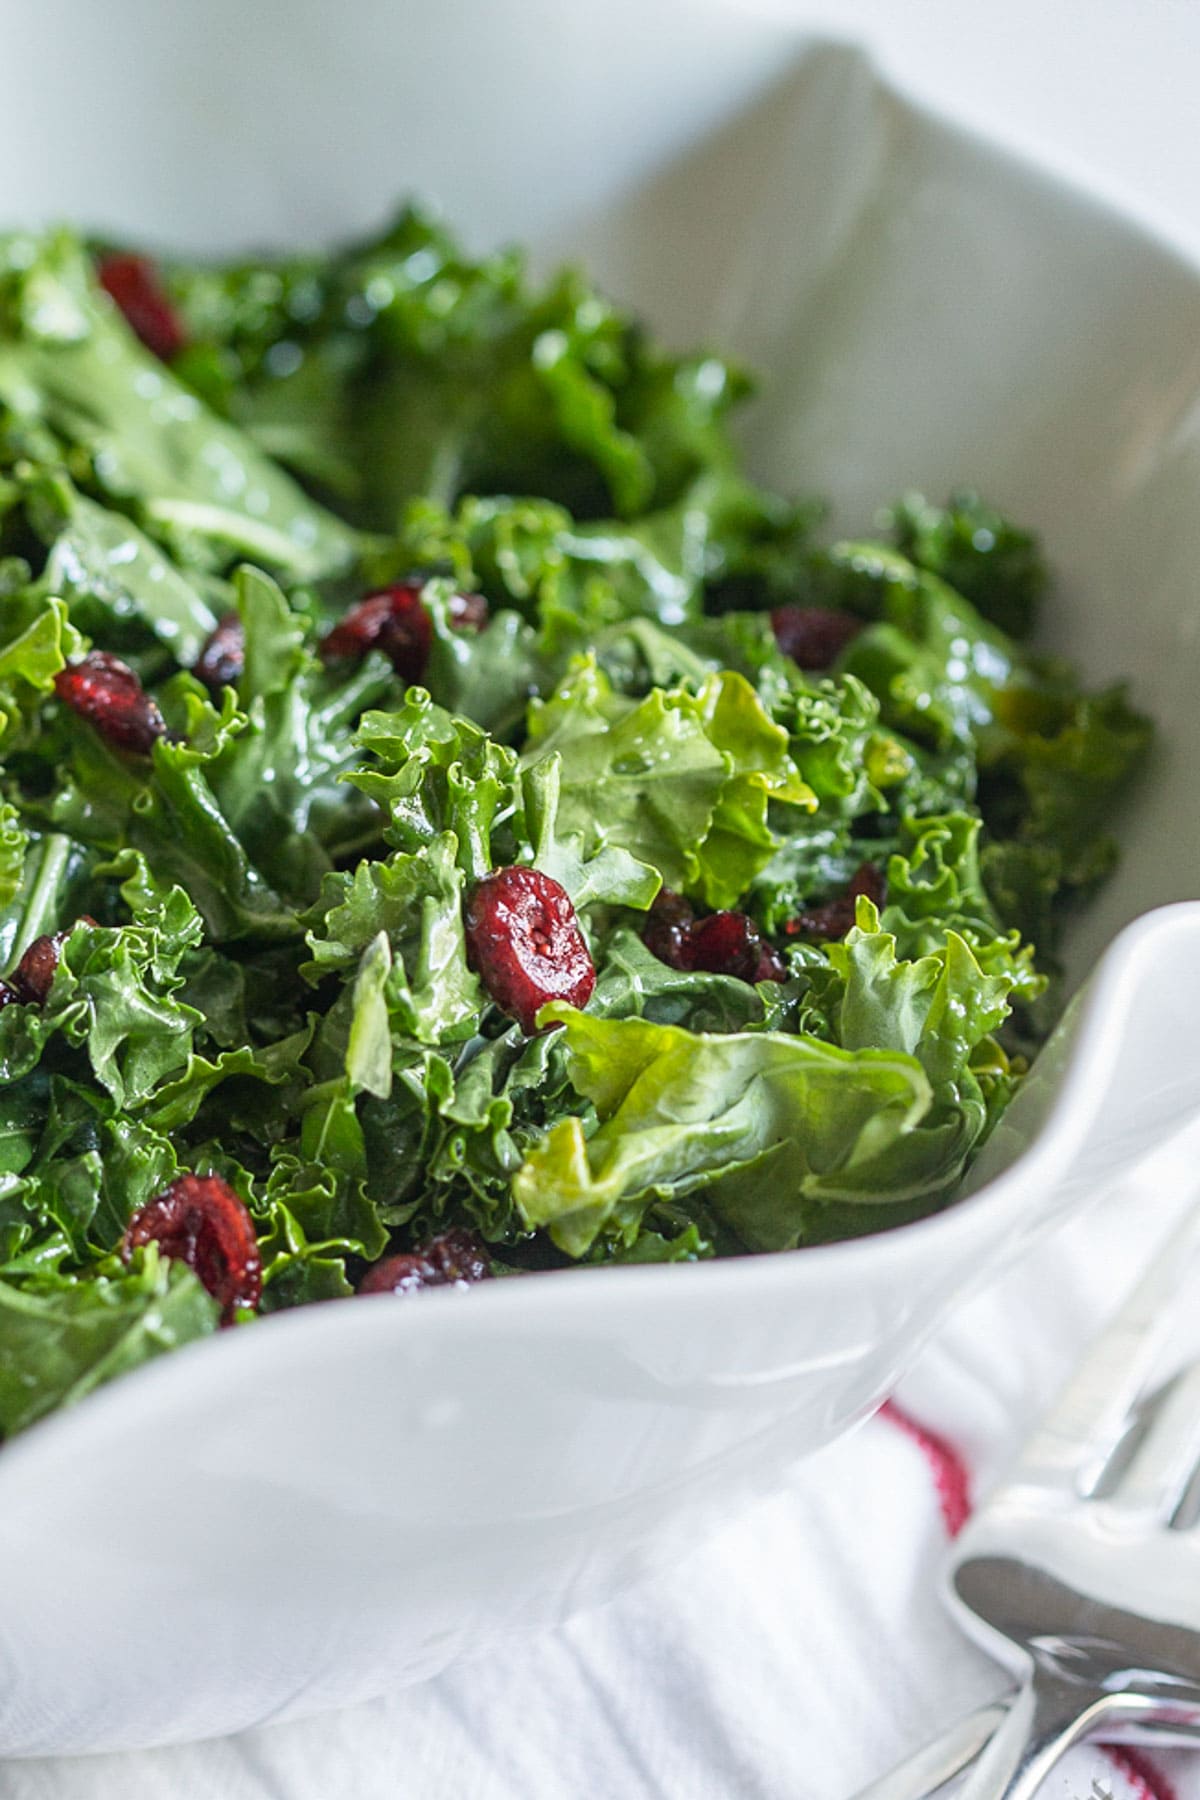 A large scalloped bowl holding a kale salad dotted with deep red cranberries.